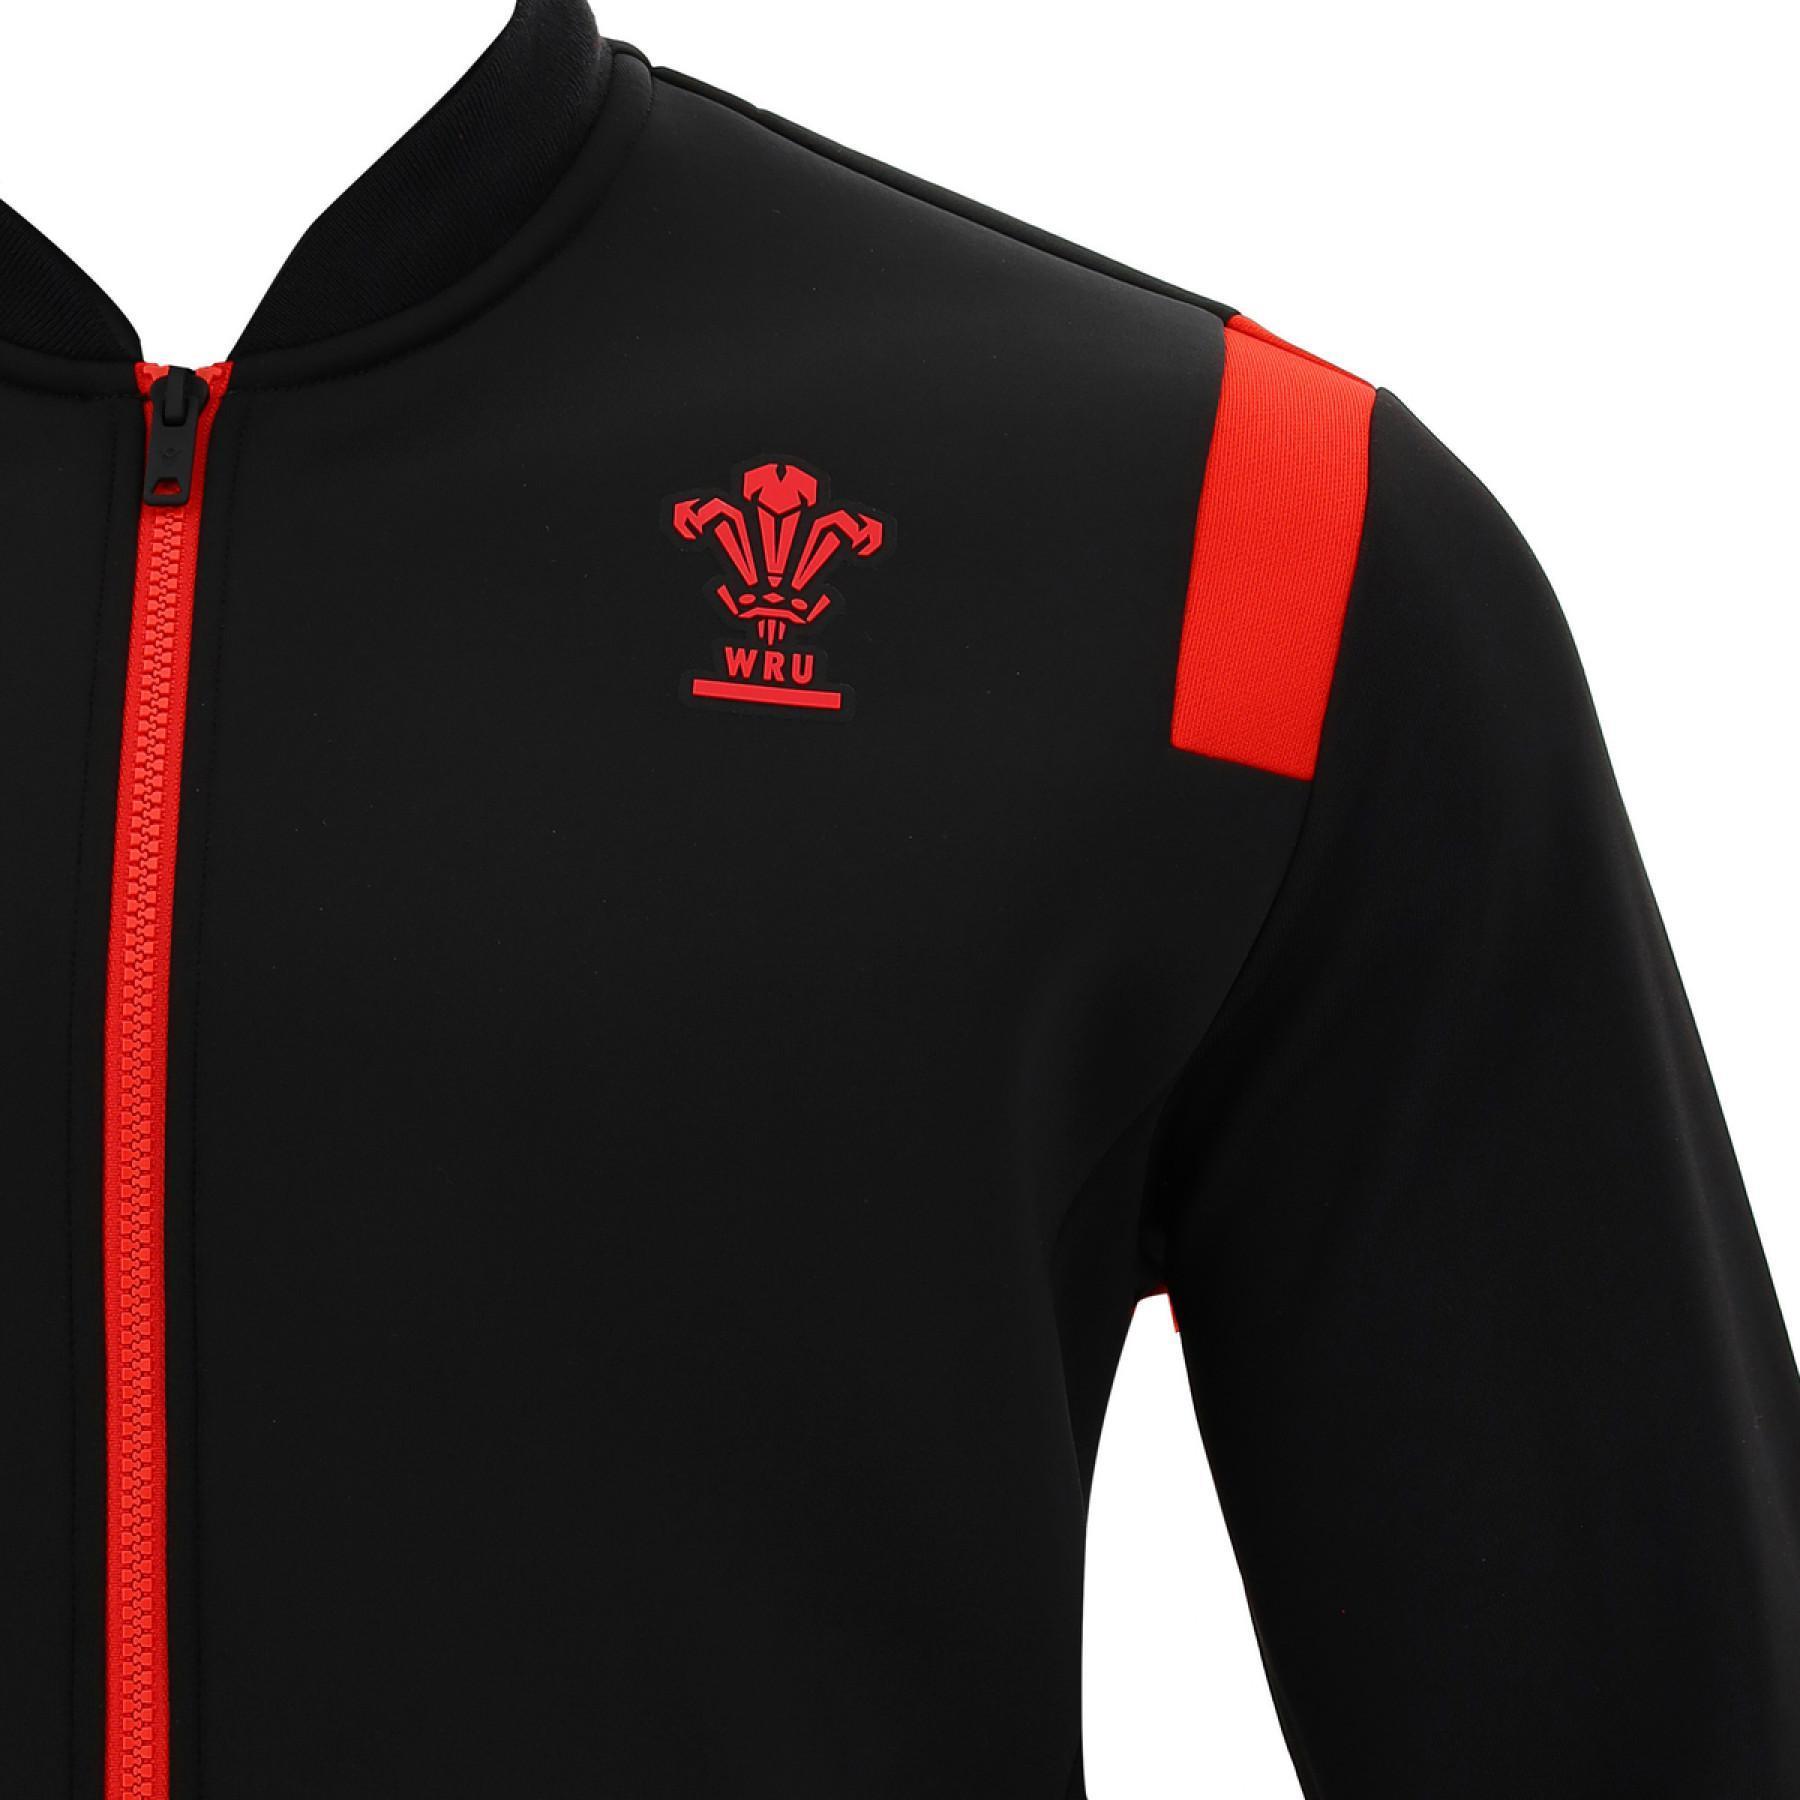 Outdoor jacket Pays de Galles rugby 2020/21